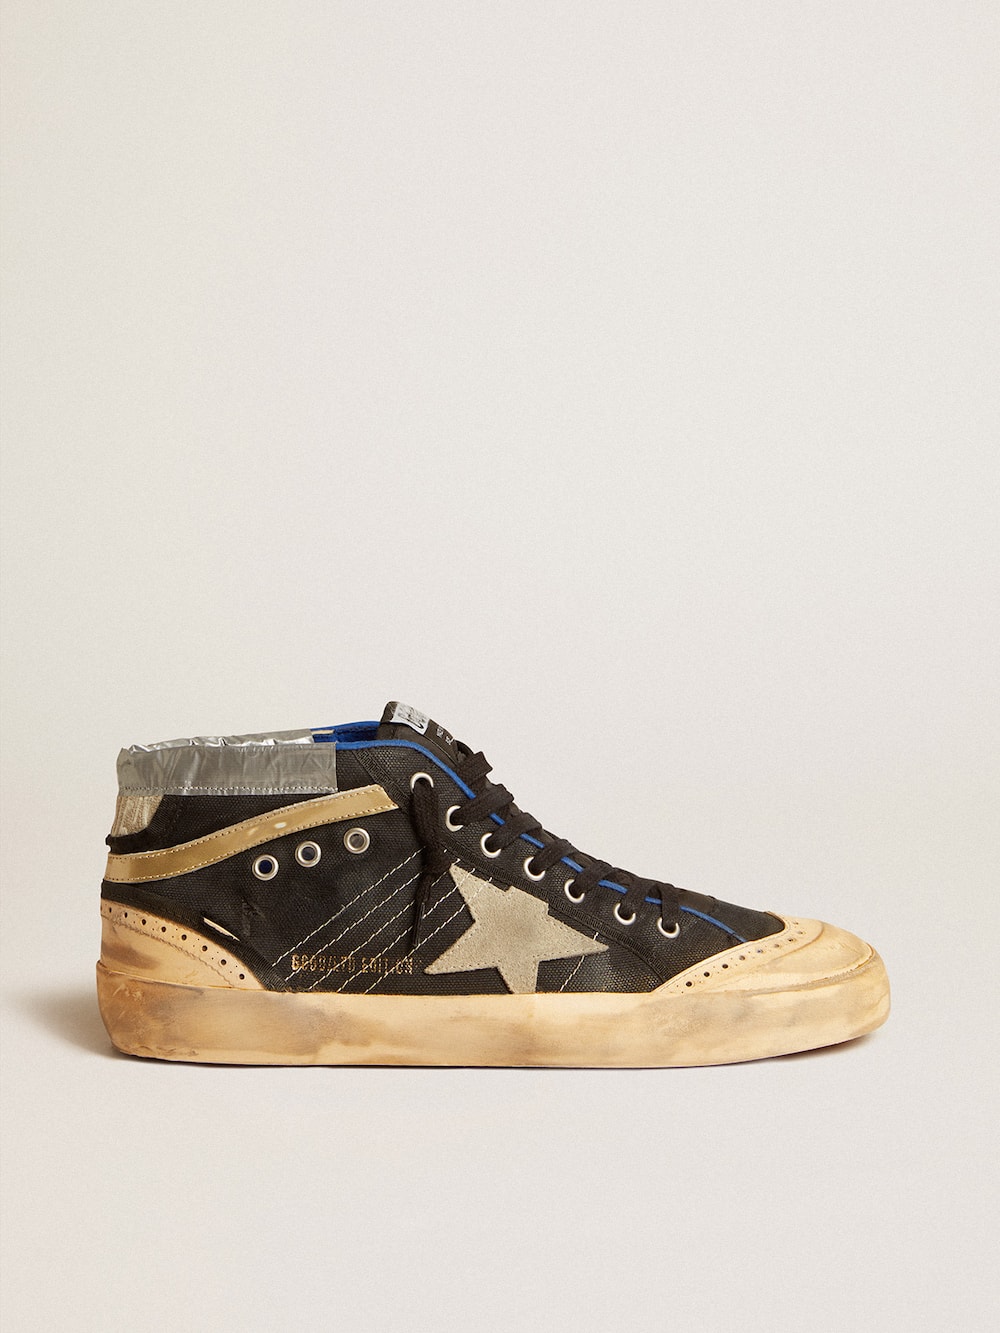 Golden Goose - Women’s Mid Star LAB in black canvas with ice-gray suede star in 